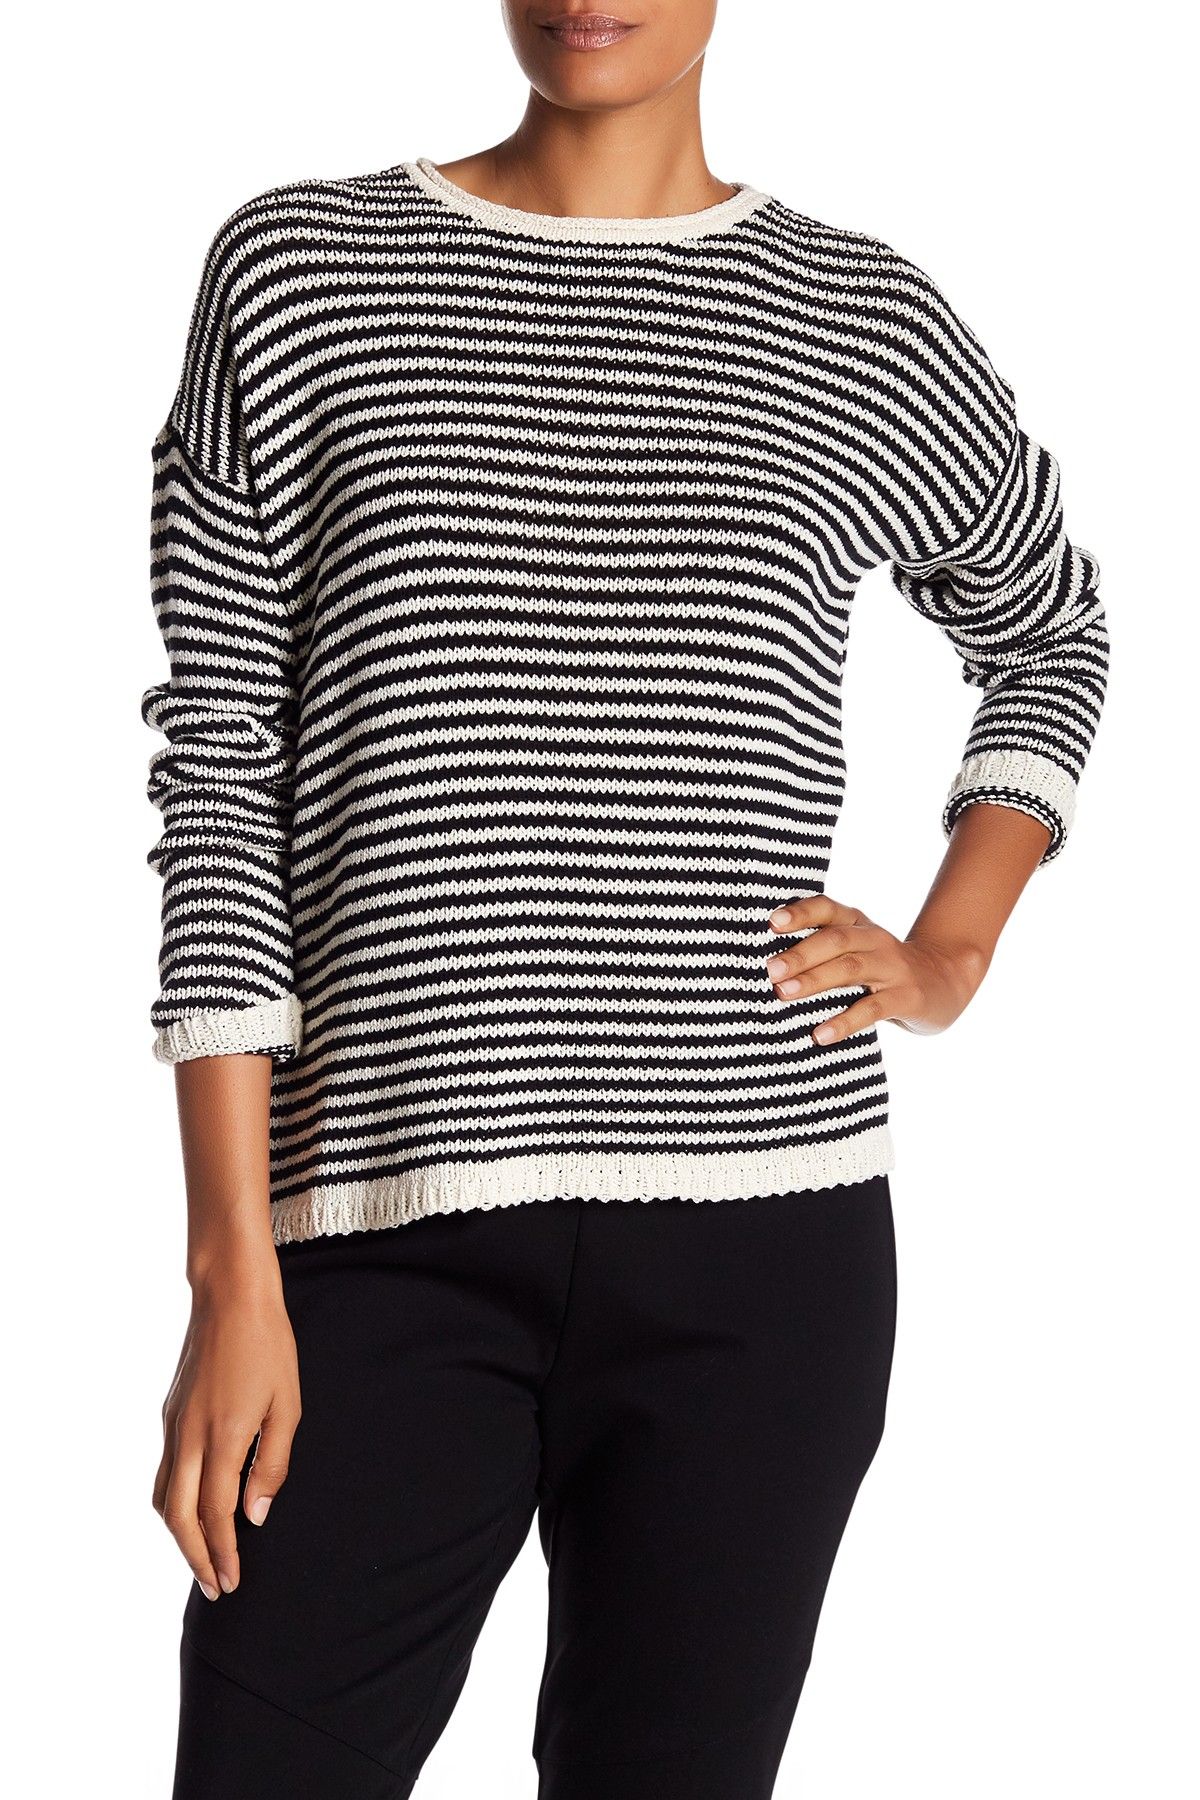 Striped Box Sweater | Eileen fisher, Fisher and Box